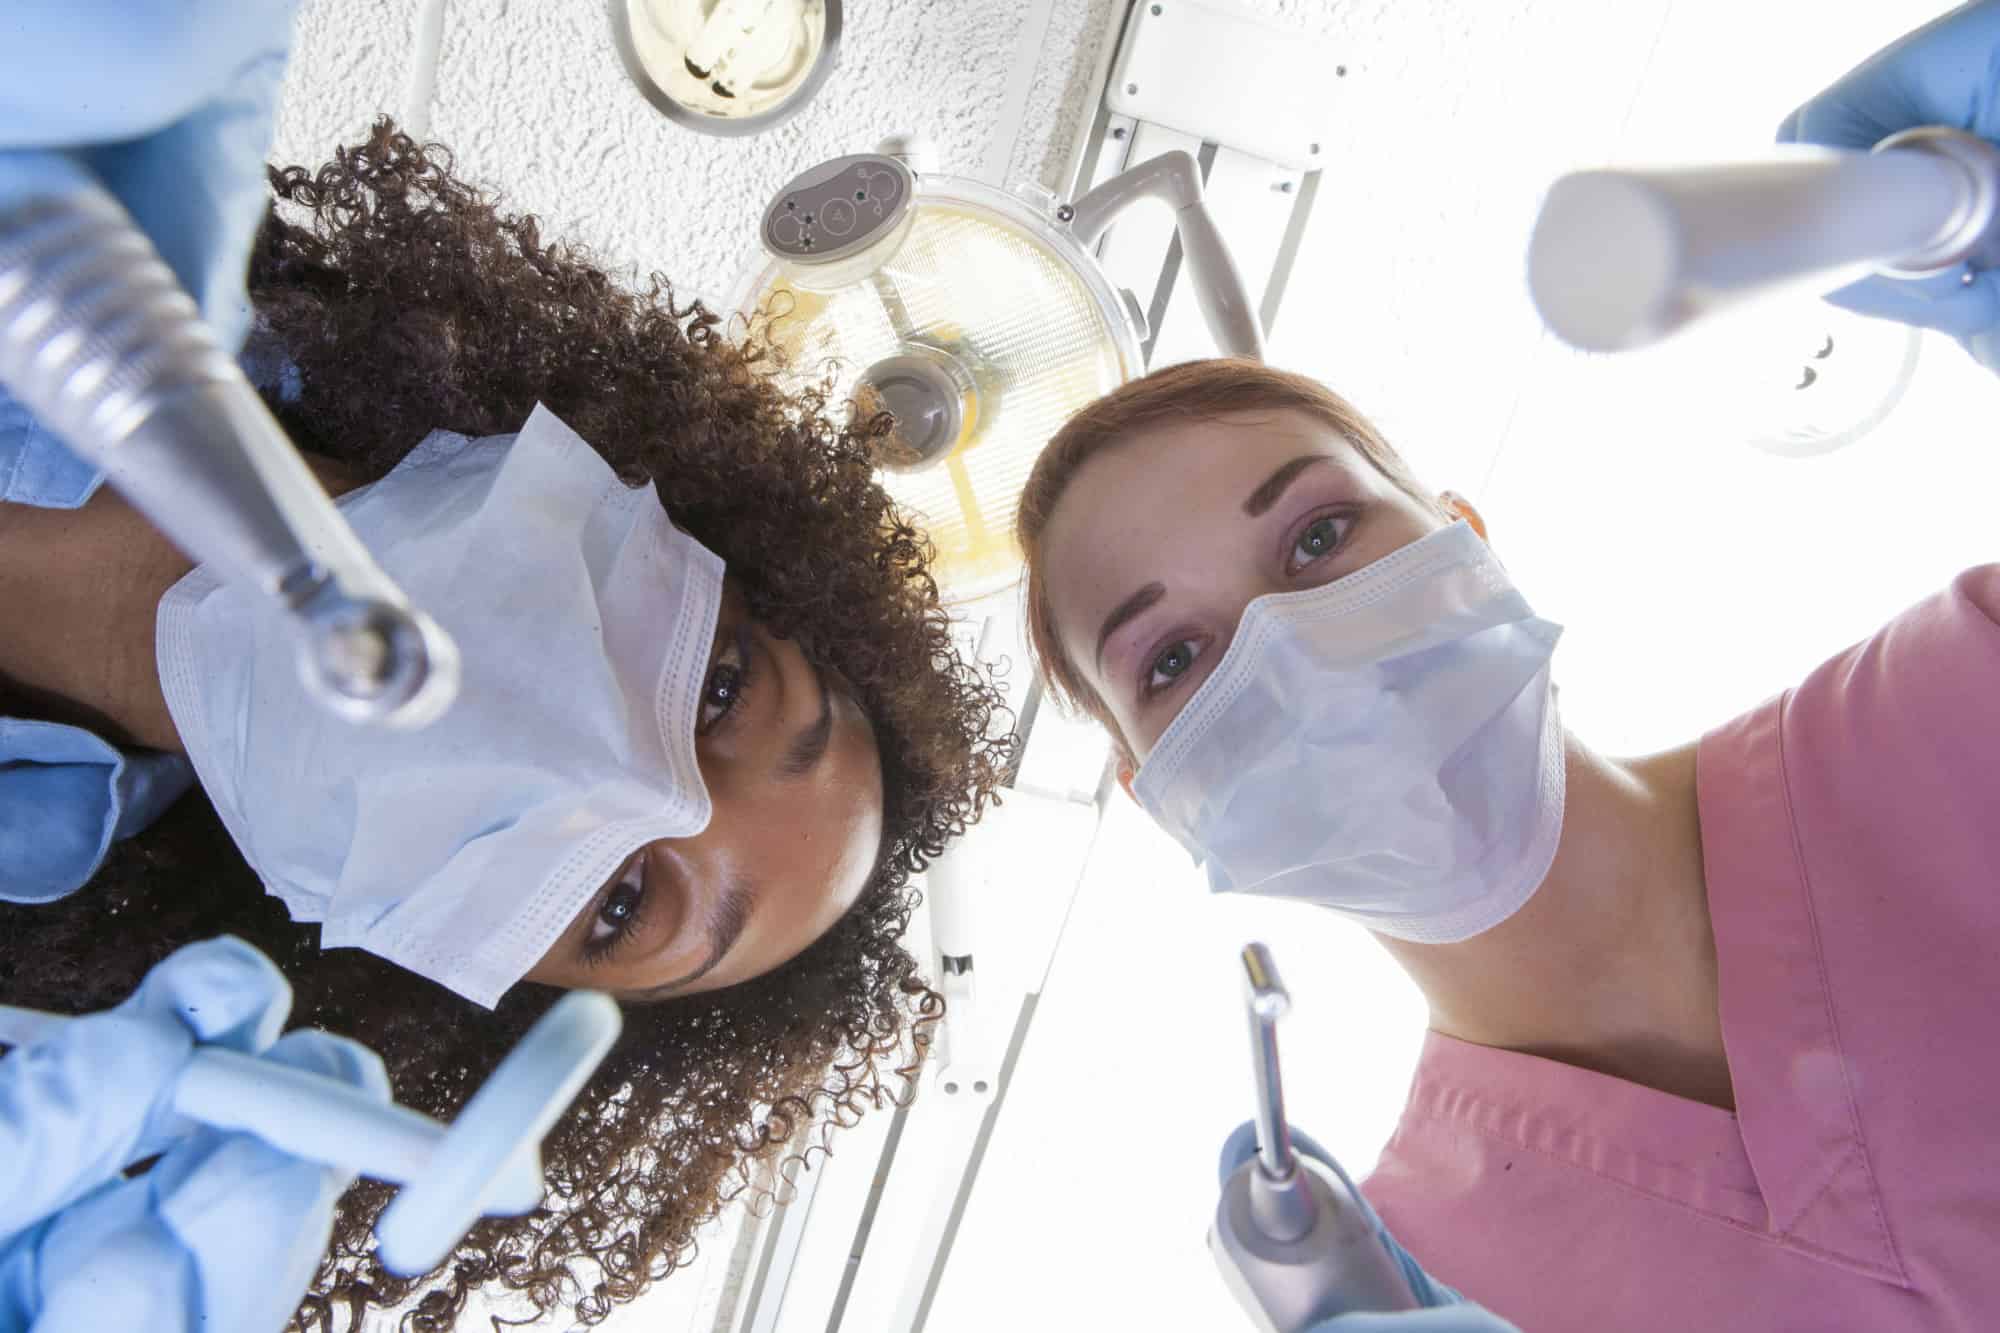 Dental Assistant Certification: How to Become a Certified Dental Assistant